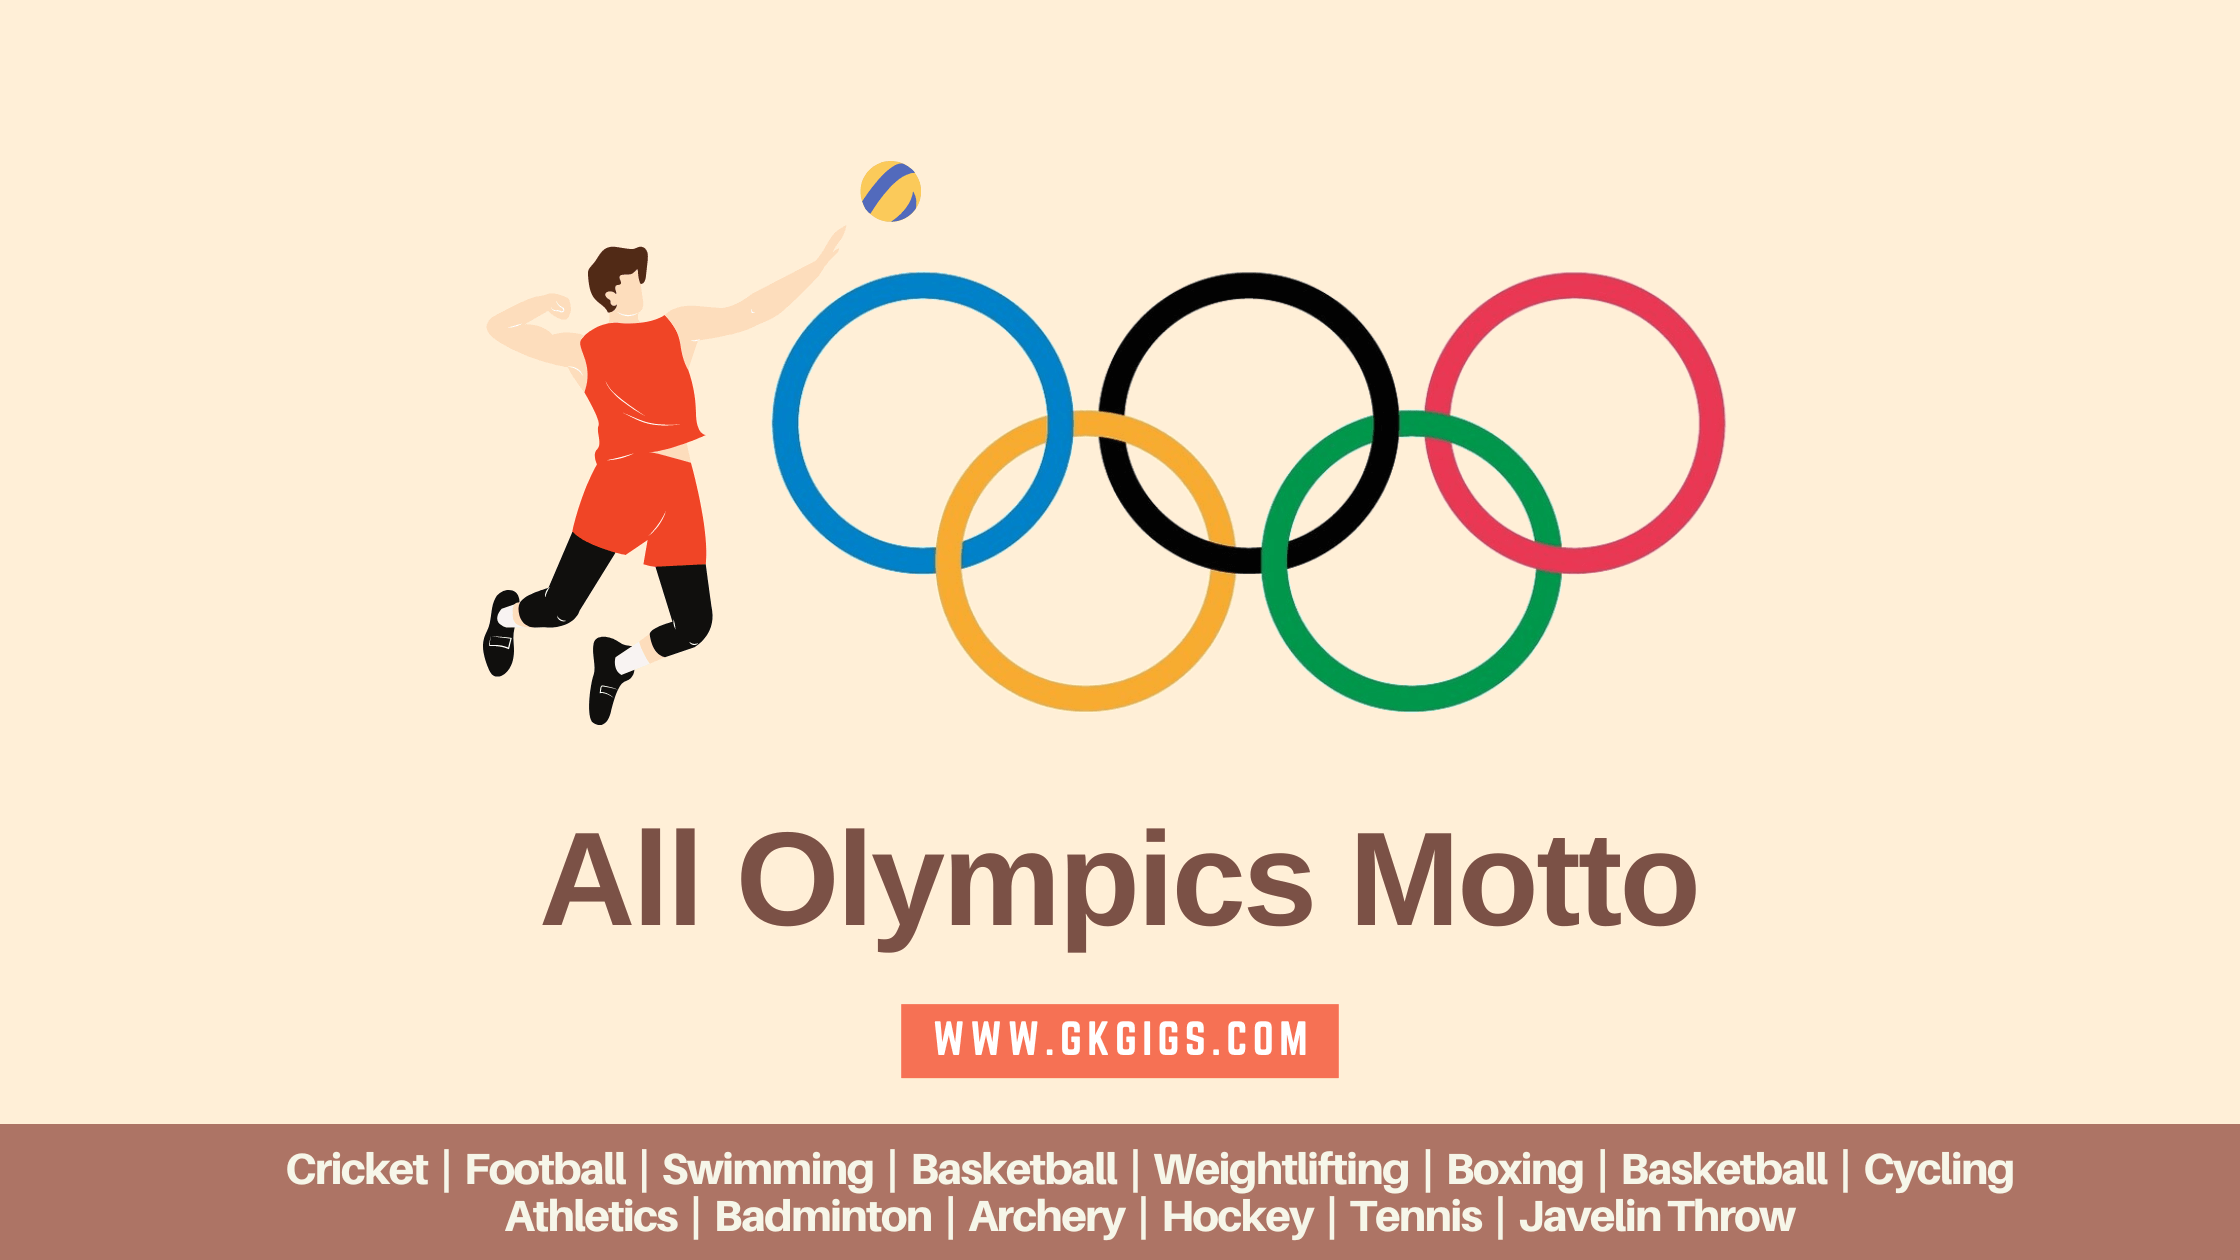 list-of-all-olympics-motto-from-1896-to-2026-gkgigs